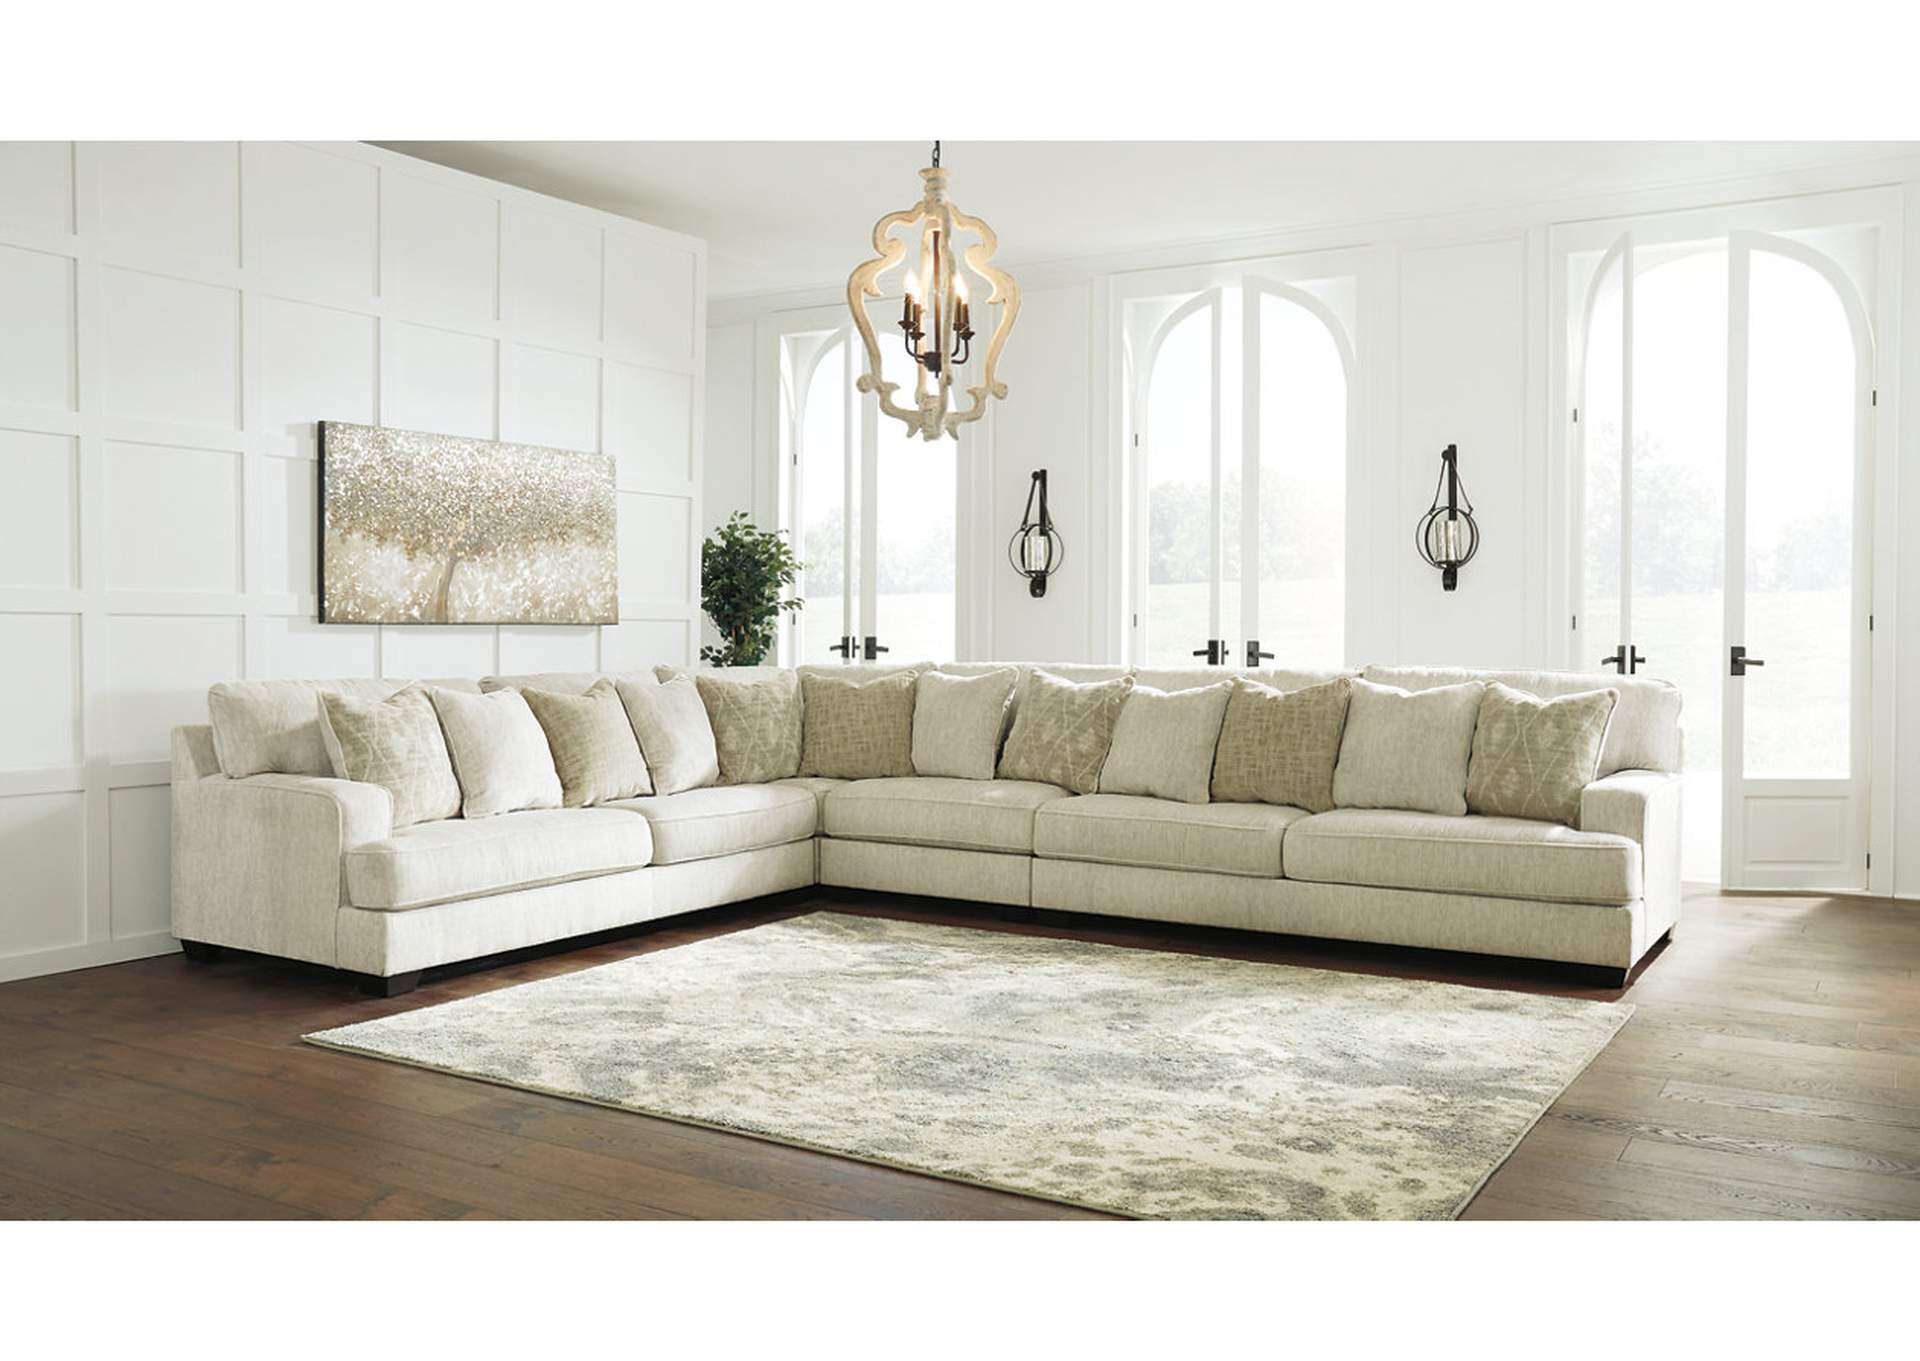 Barnett Brown Furniture Florence Al Rawcliffe 4 Piece Sectional